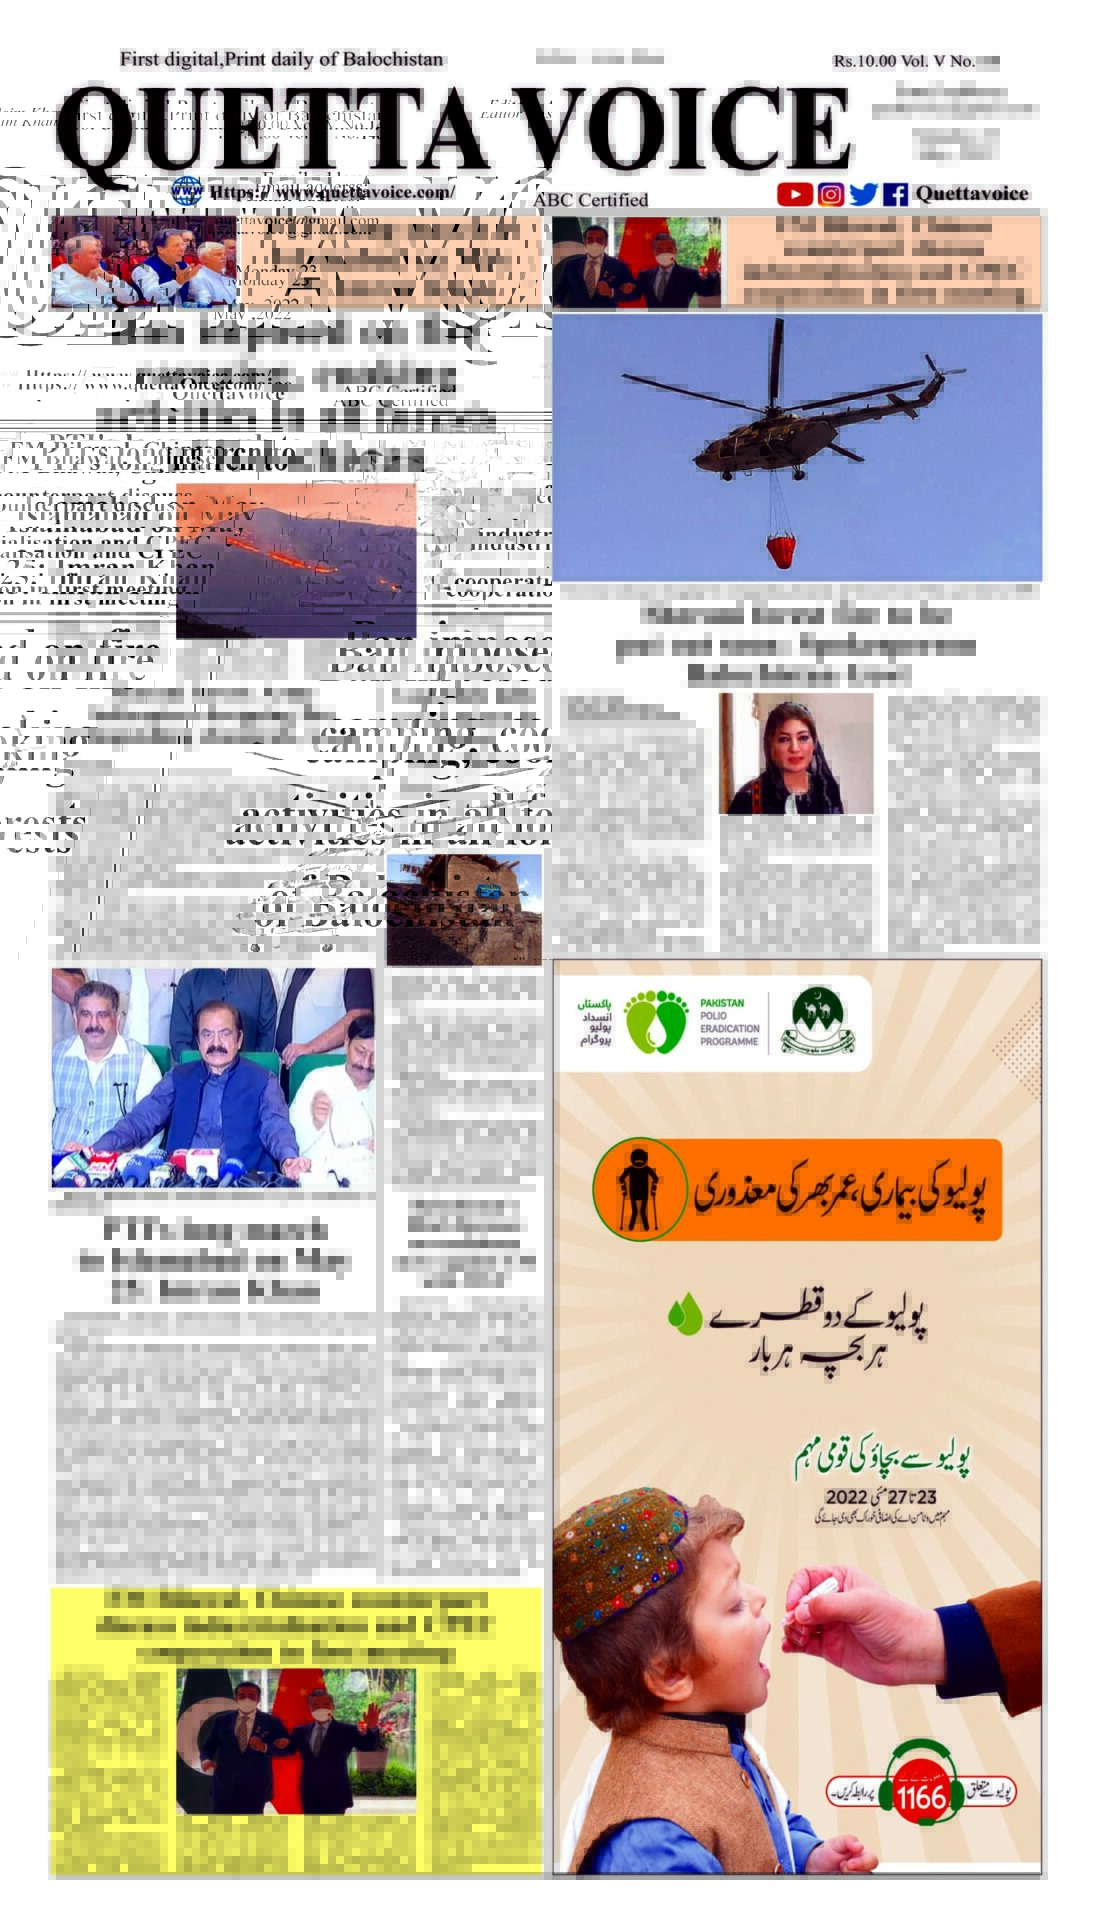 Today's Quetta Voice Newspaper, Monday, May 23, 2022